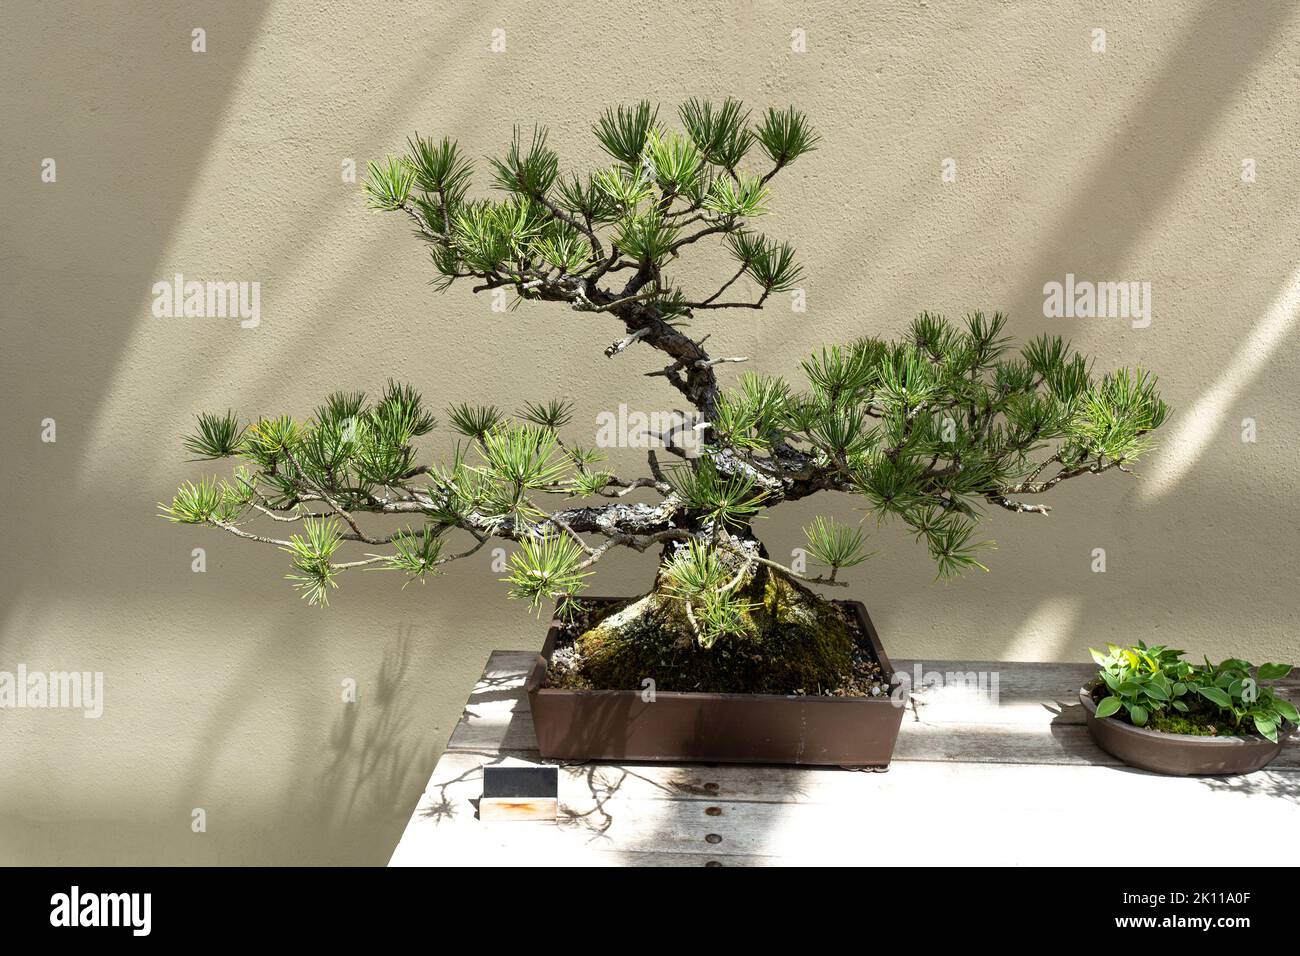 Miniature tree of natural Pinus Rigida Bonsai also known as Pitch Pine, against a wall Stock Photo